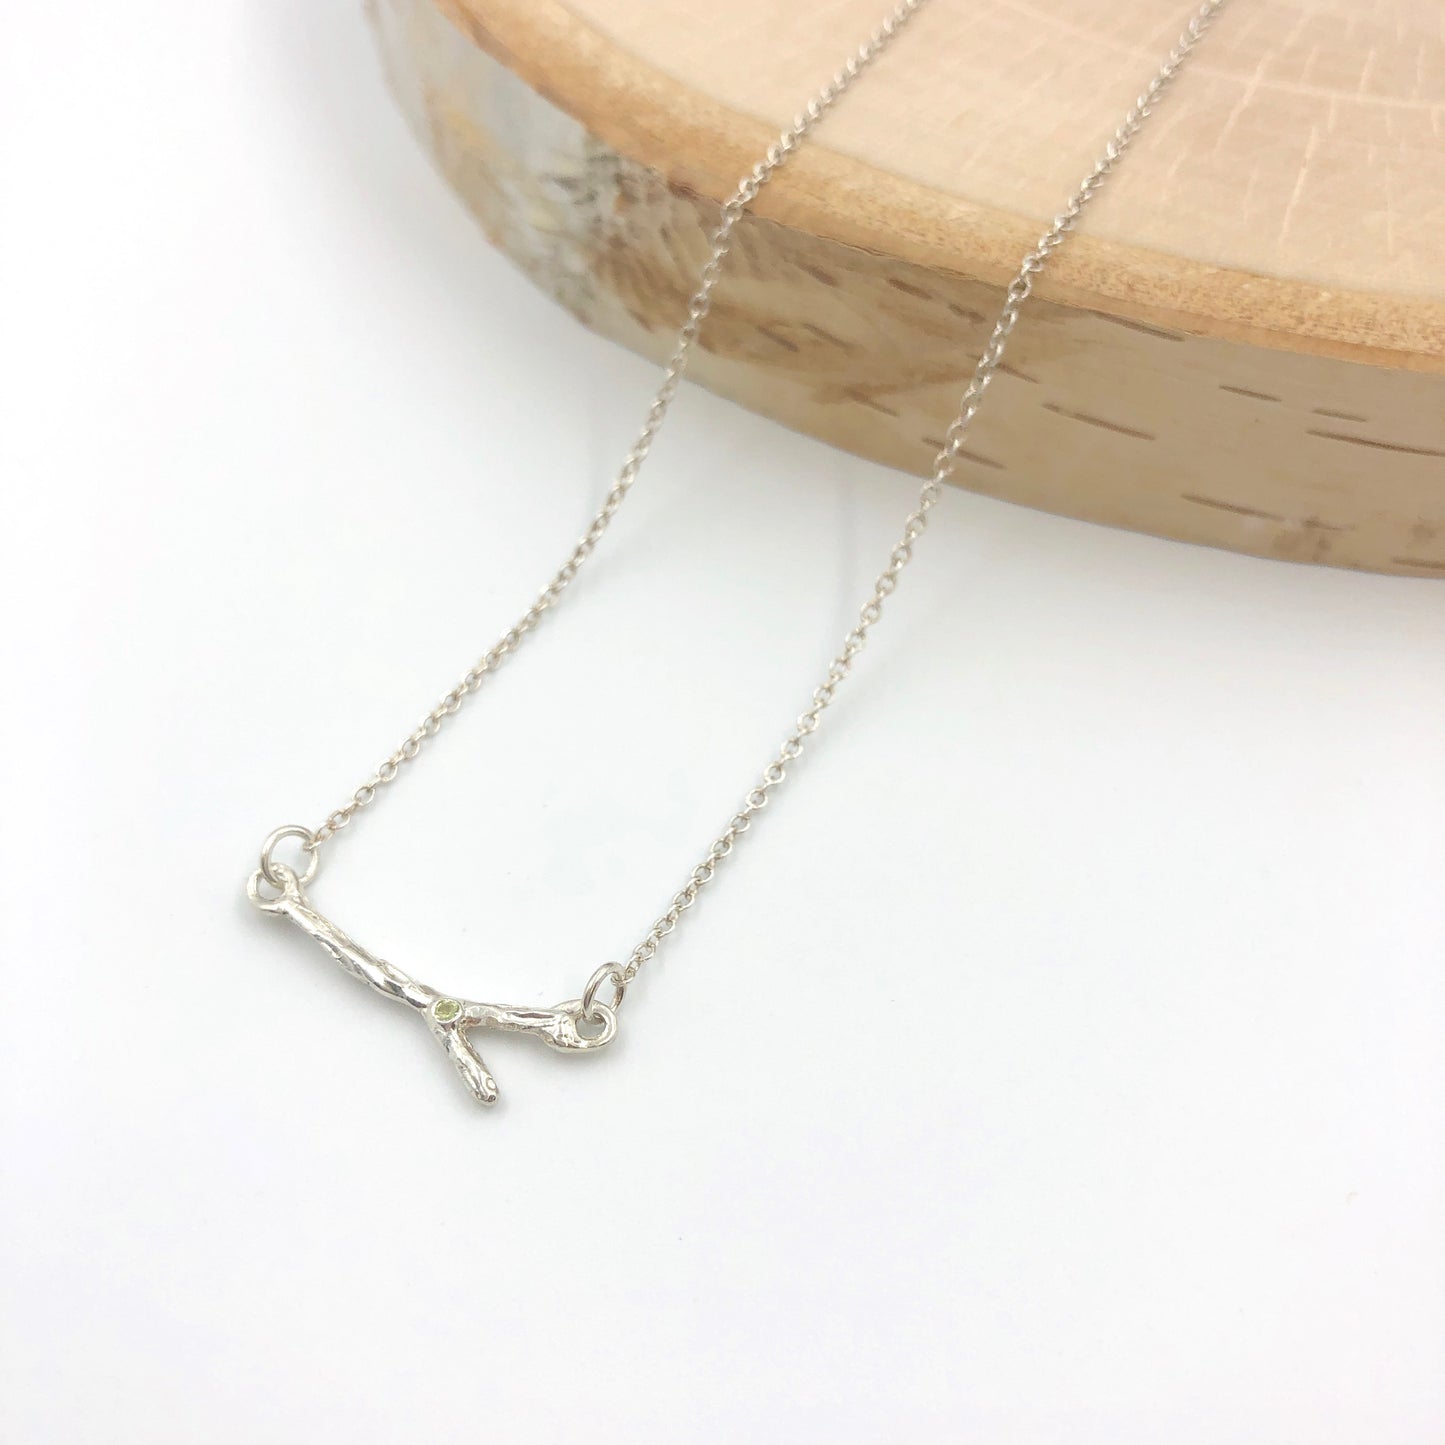 Kathryn Rebecca, Delicate Branch Necklace